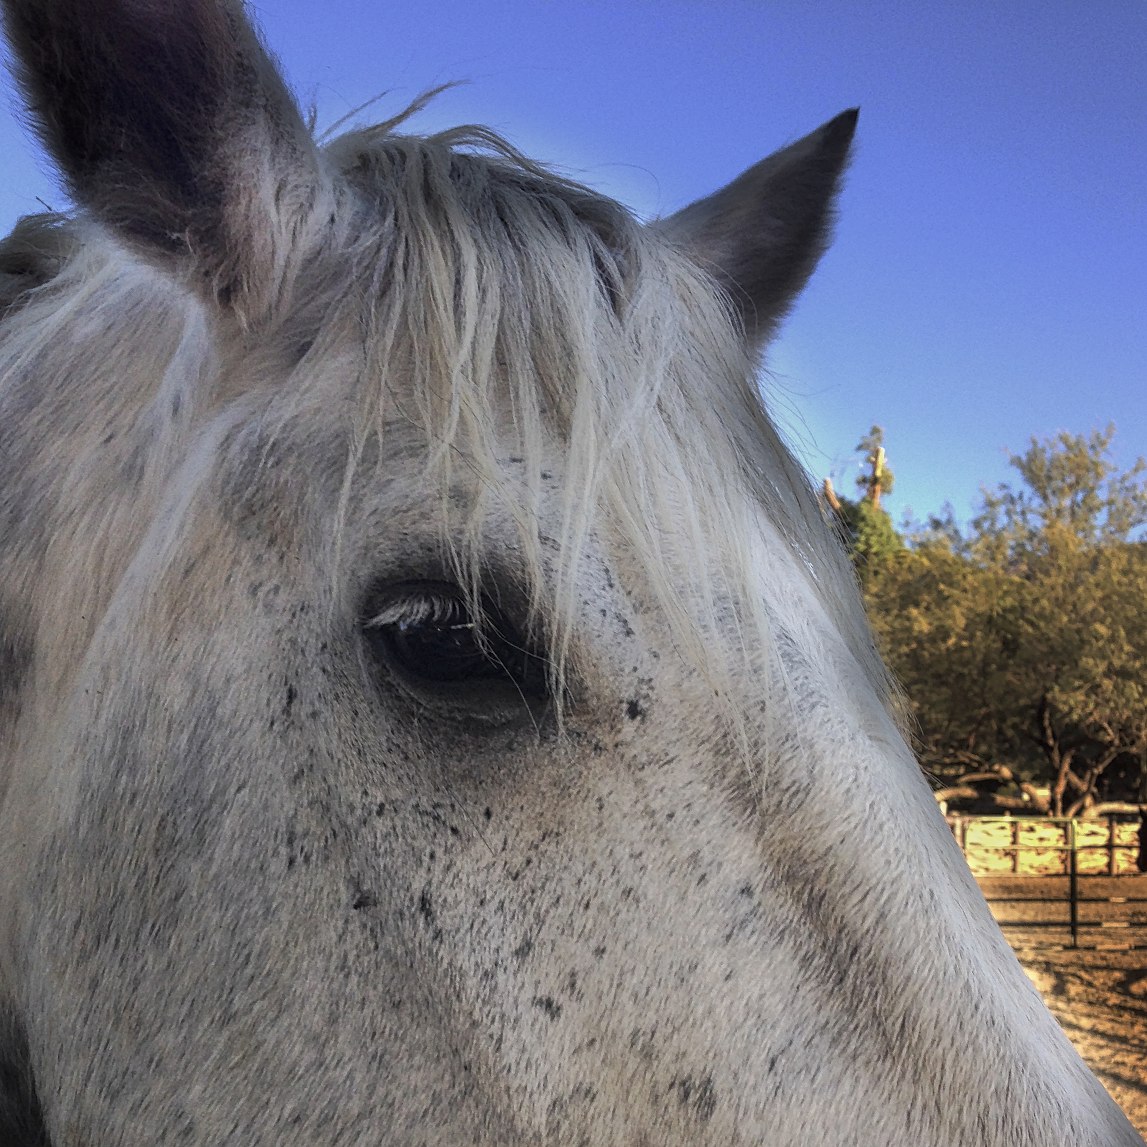 there is a close up image of the face of a horse